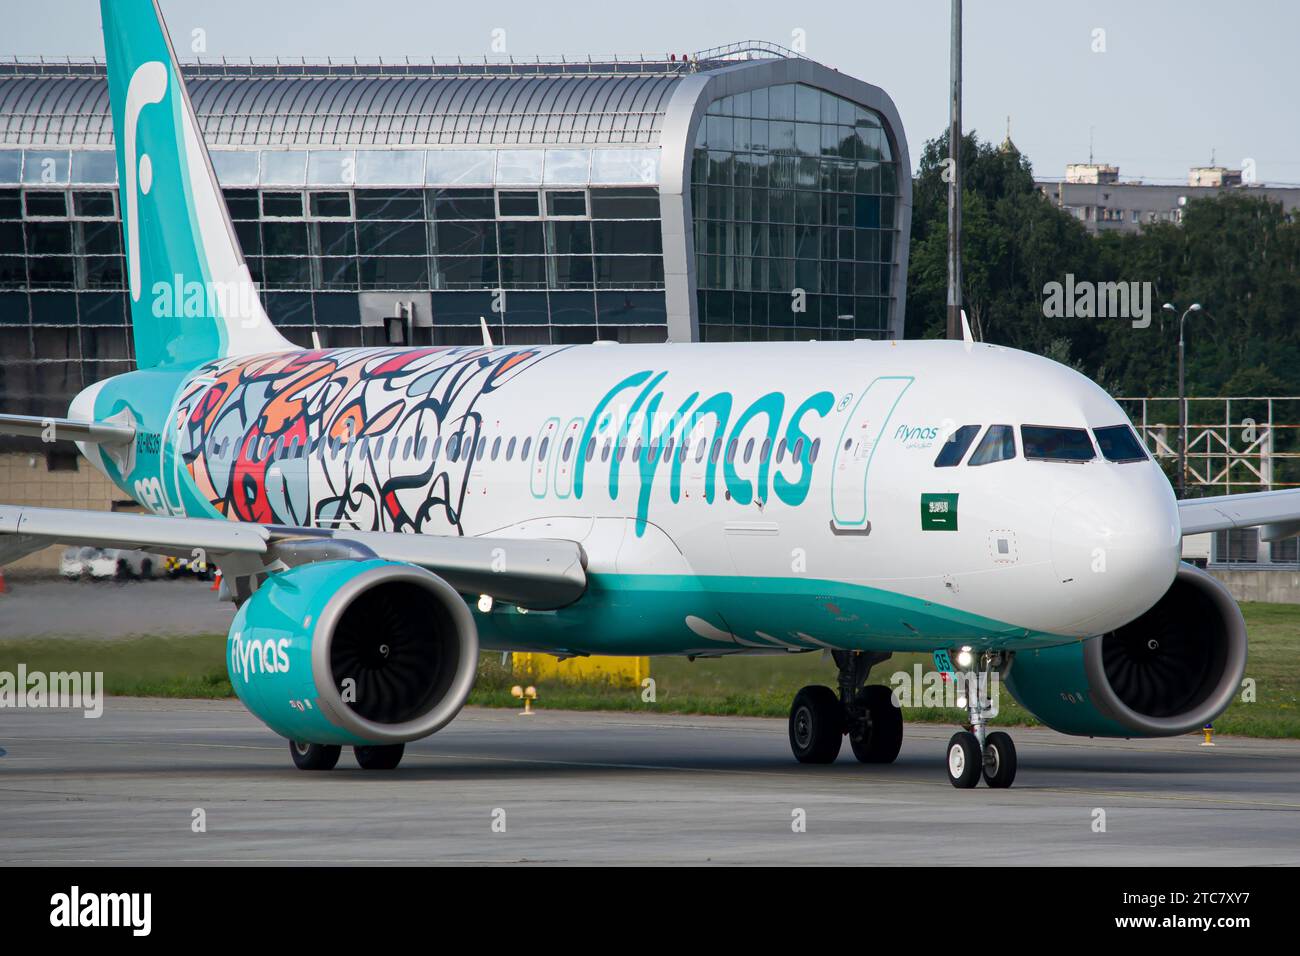 Close-up of a Saudi airline's Flynas Airbus A320 NEO in a 'Year of Arabic Calligraphy' livery taxiing for takeoff from Lviv Airport Stock Photo